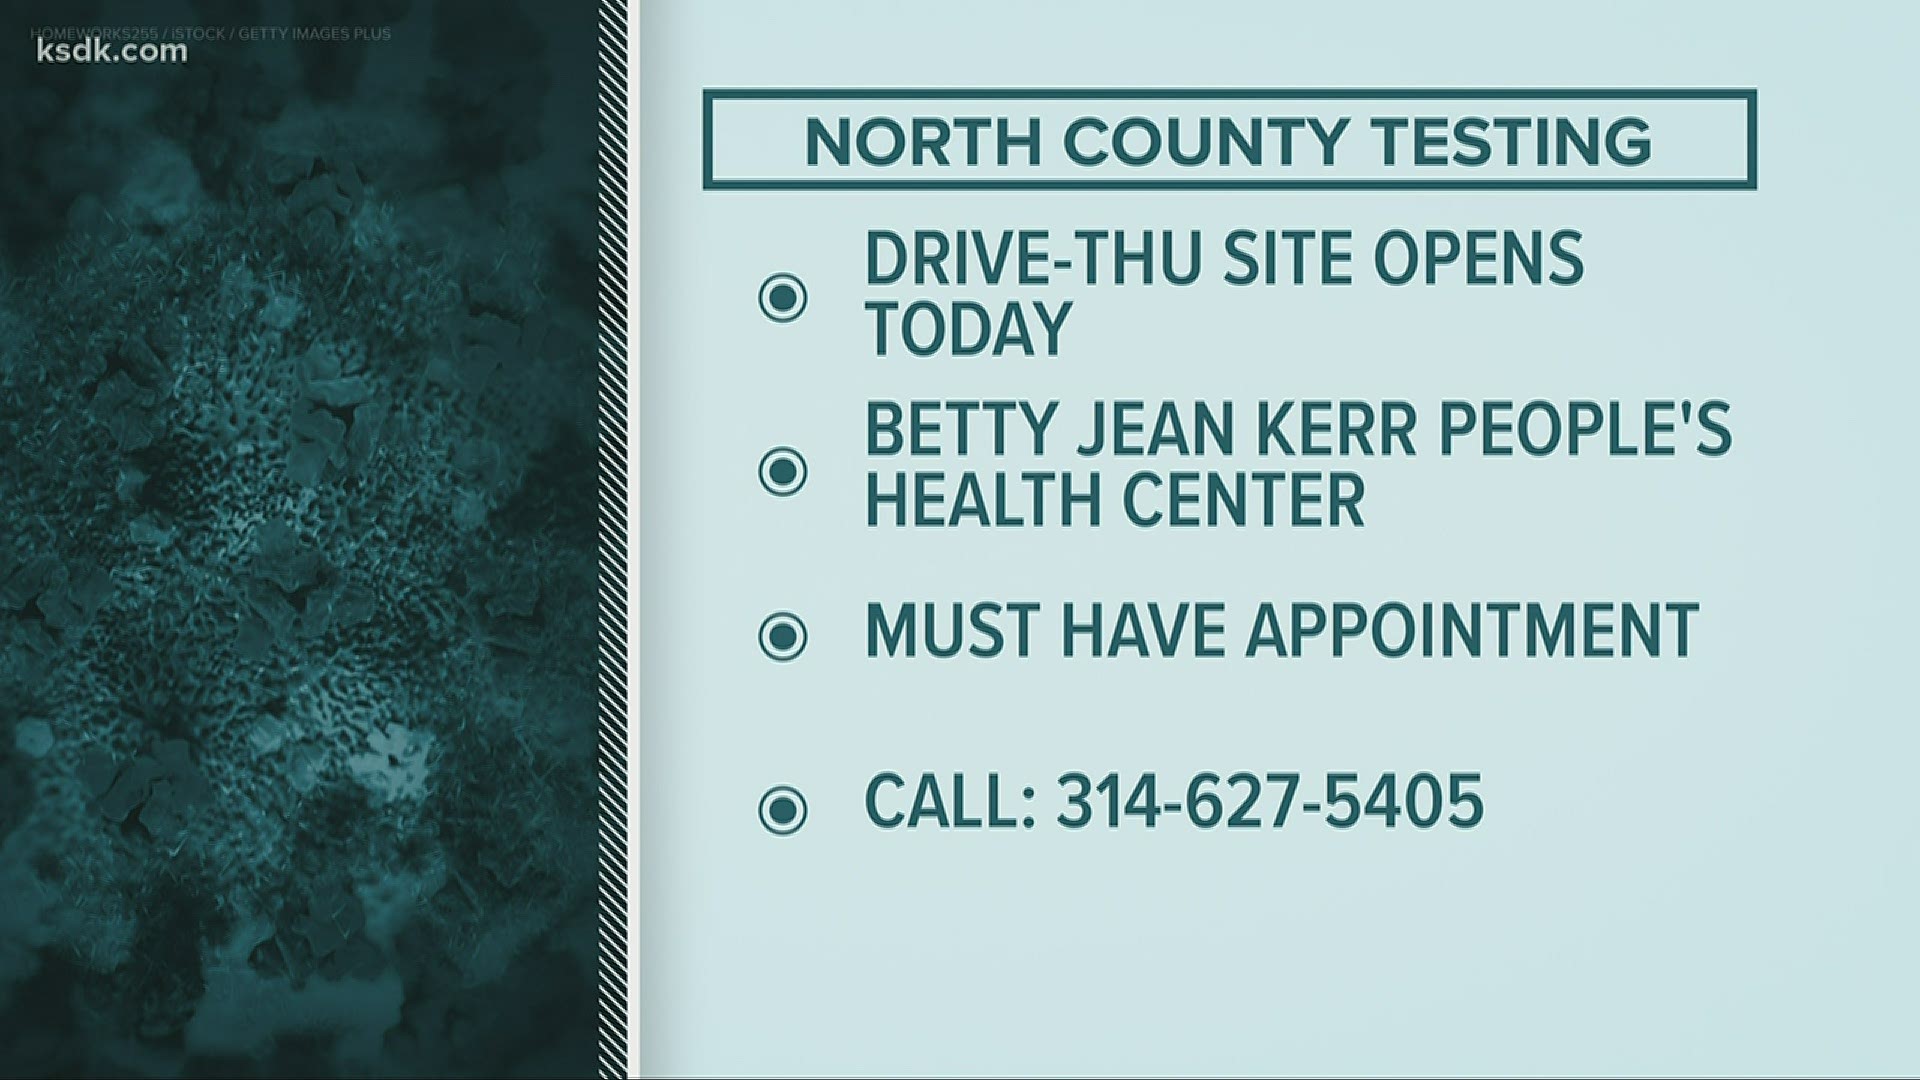 You can now go to the Betty Jean Kerr people's health center on west Florrisant